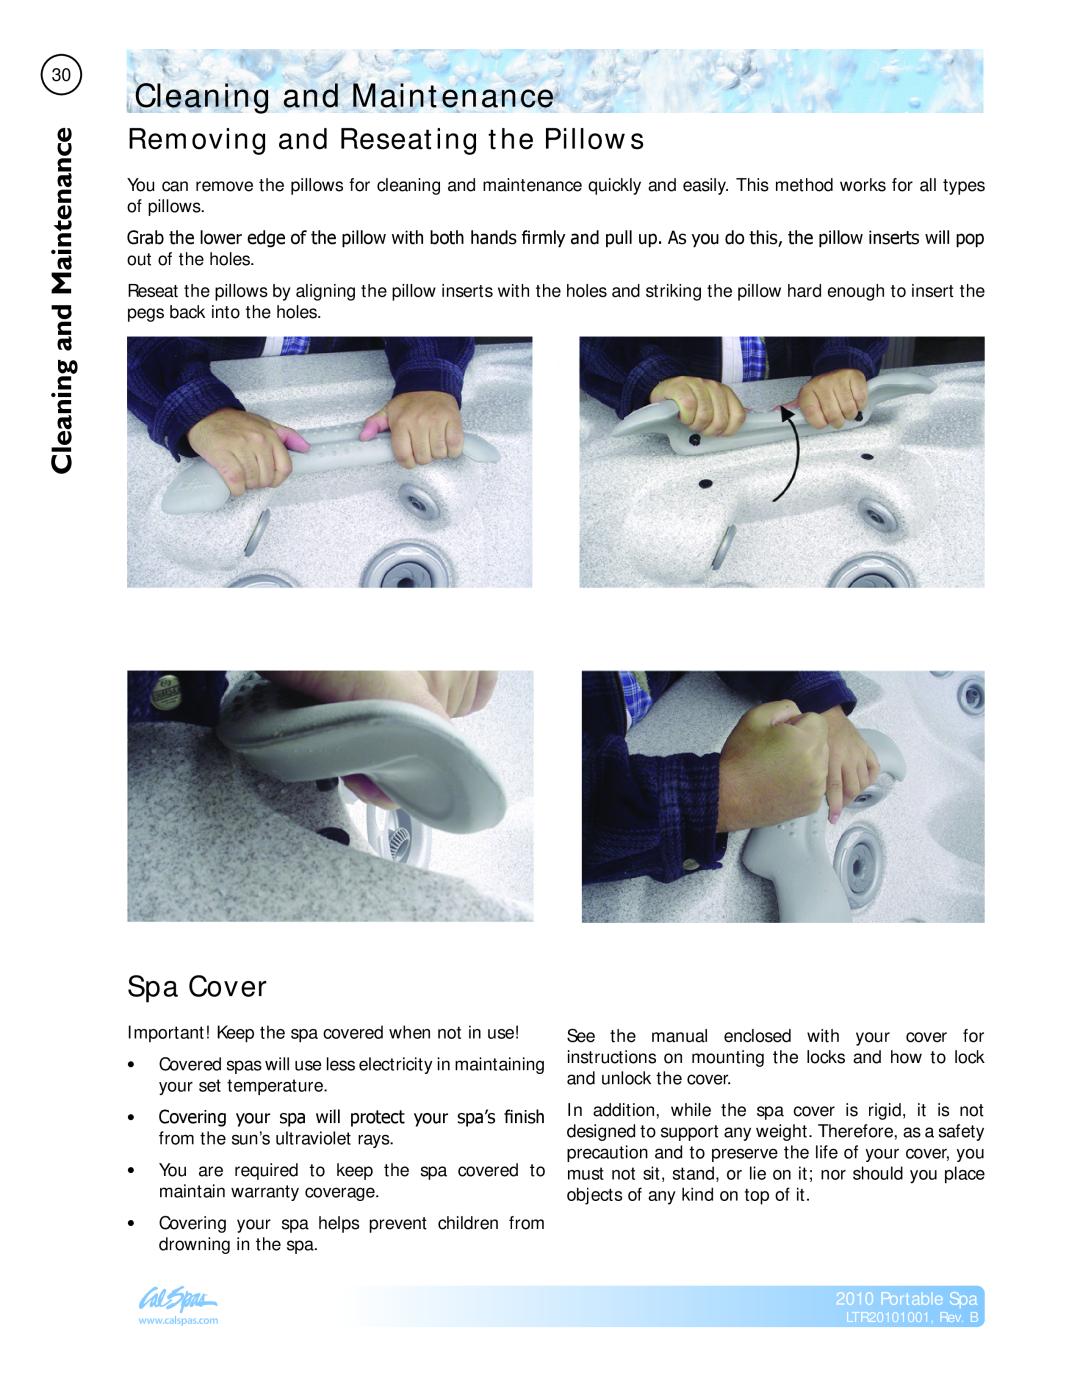 Cal Spas LTR20101001 manual Cleaning and Maintenance, Removing and Reseating the Pillows, Spa Cover, Portable Spa 